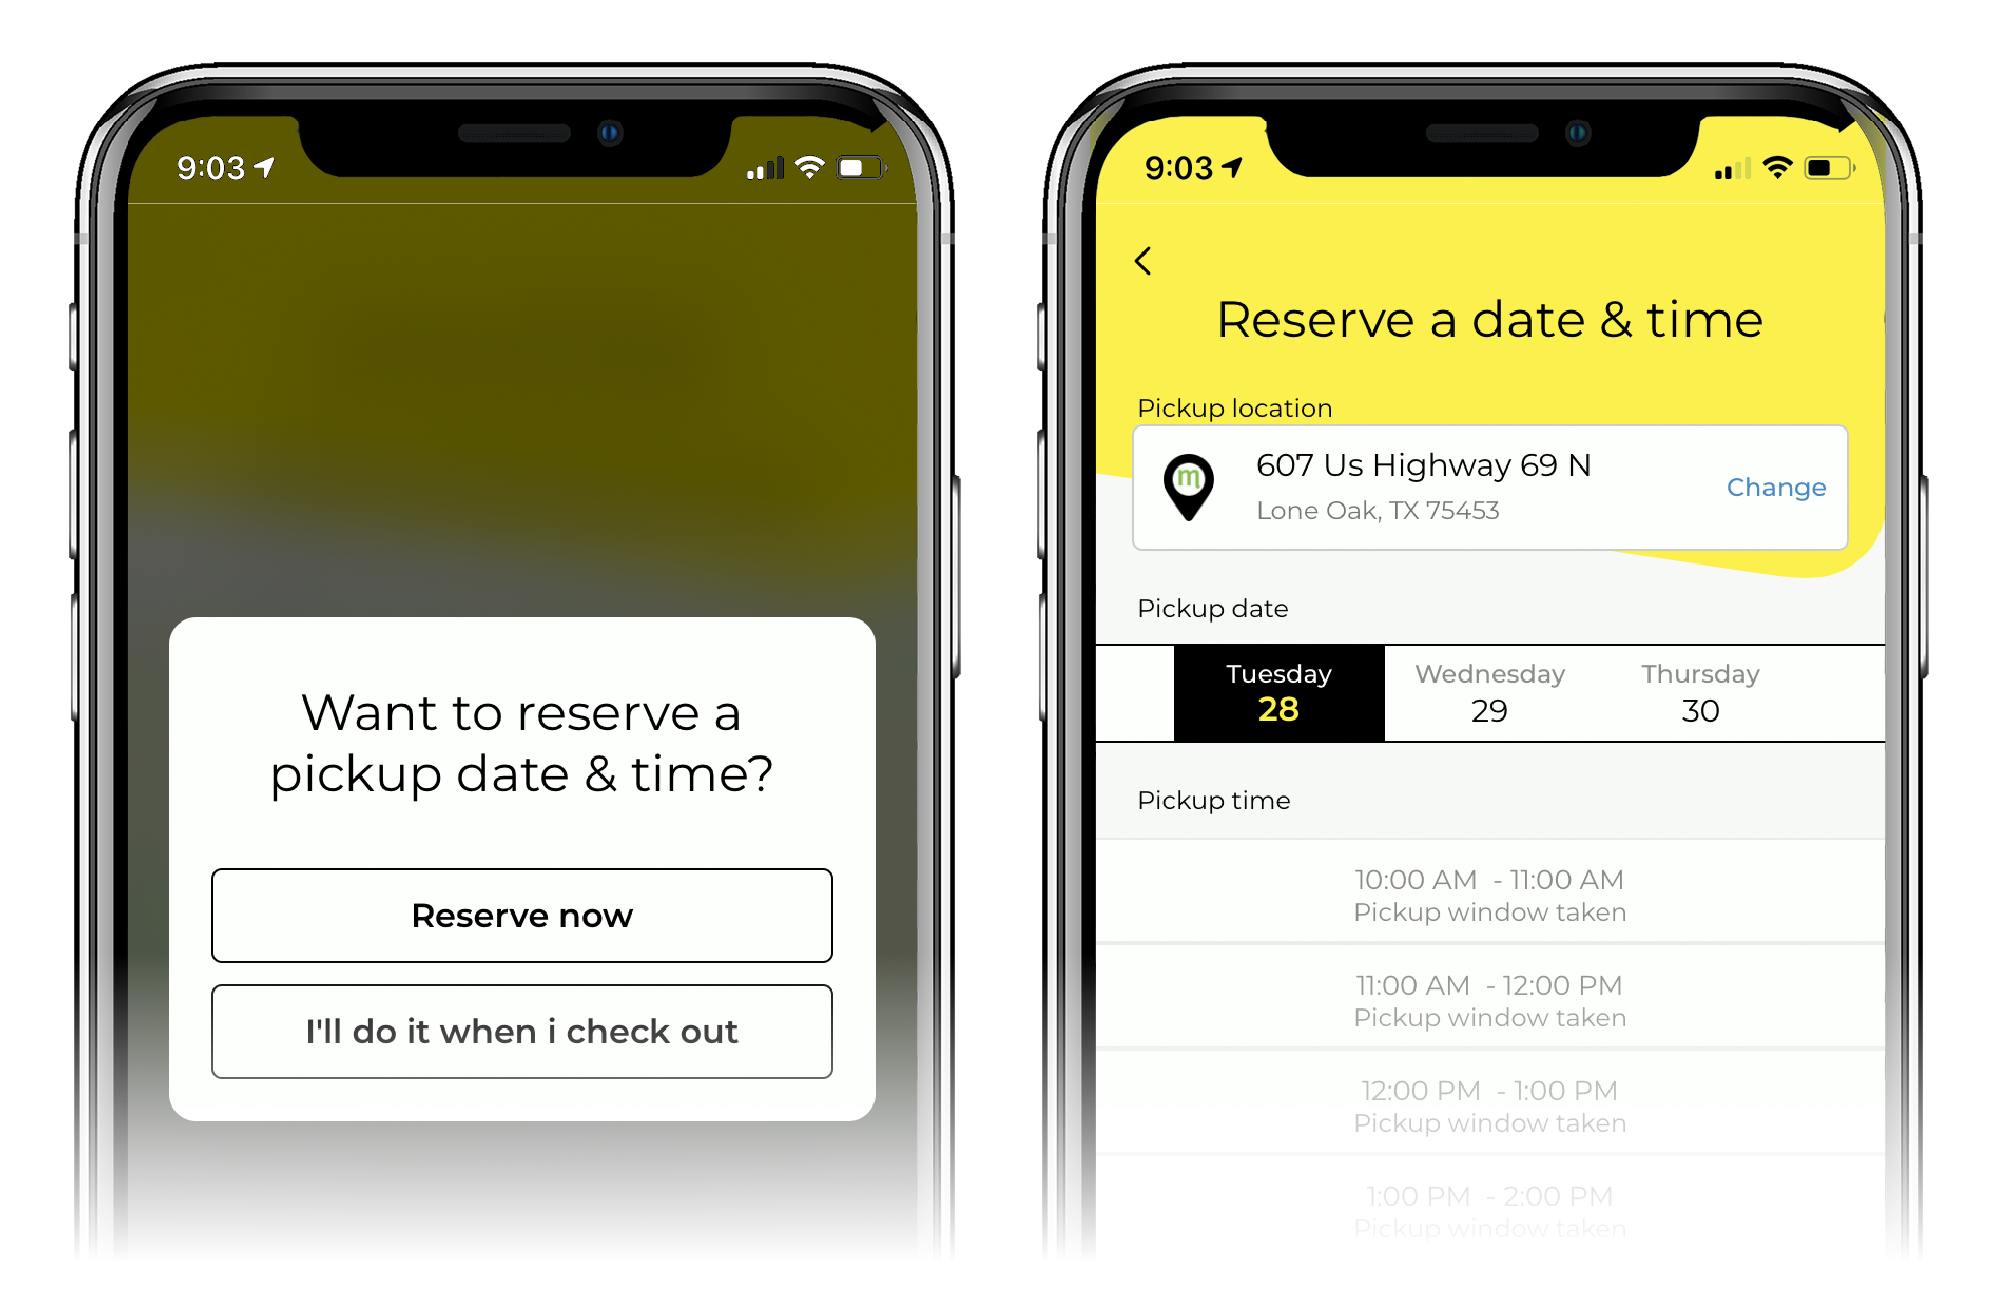 phone screen asks if user wants to reserve pickup time and gives options